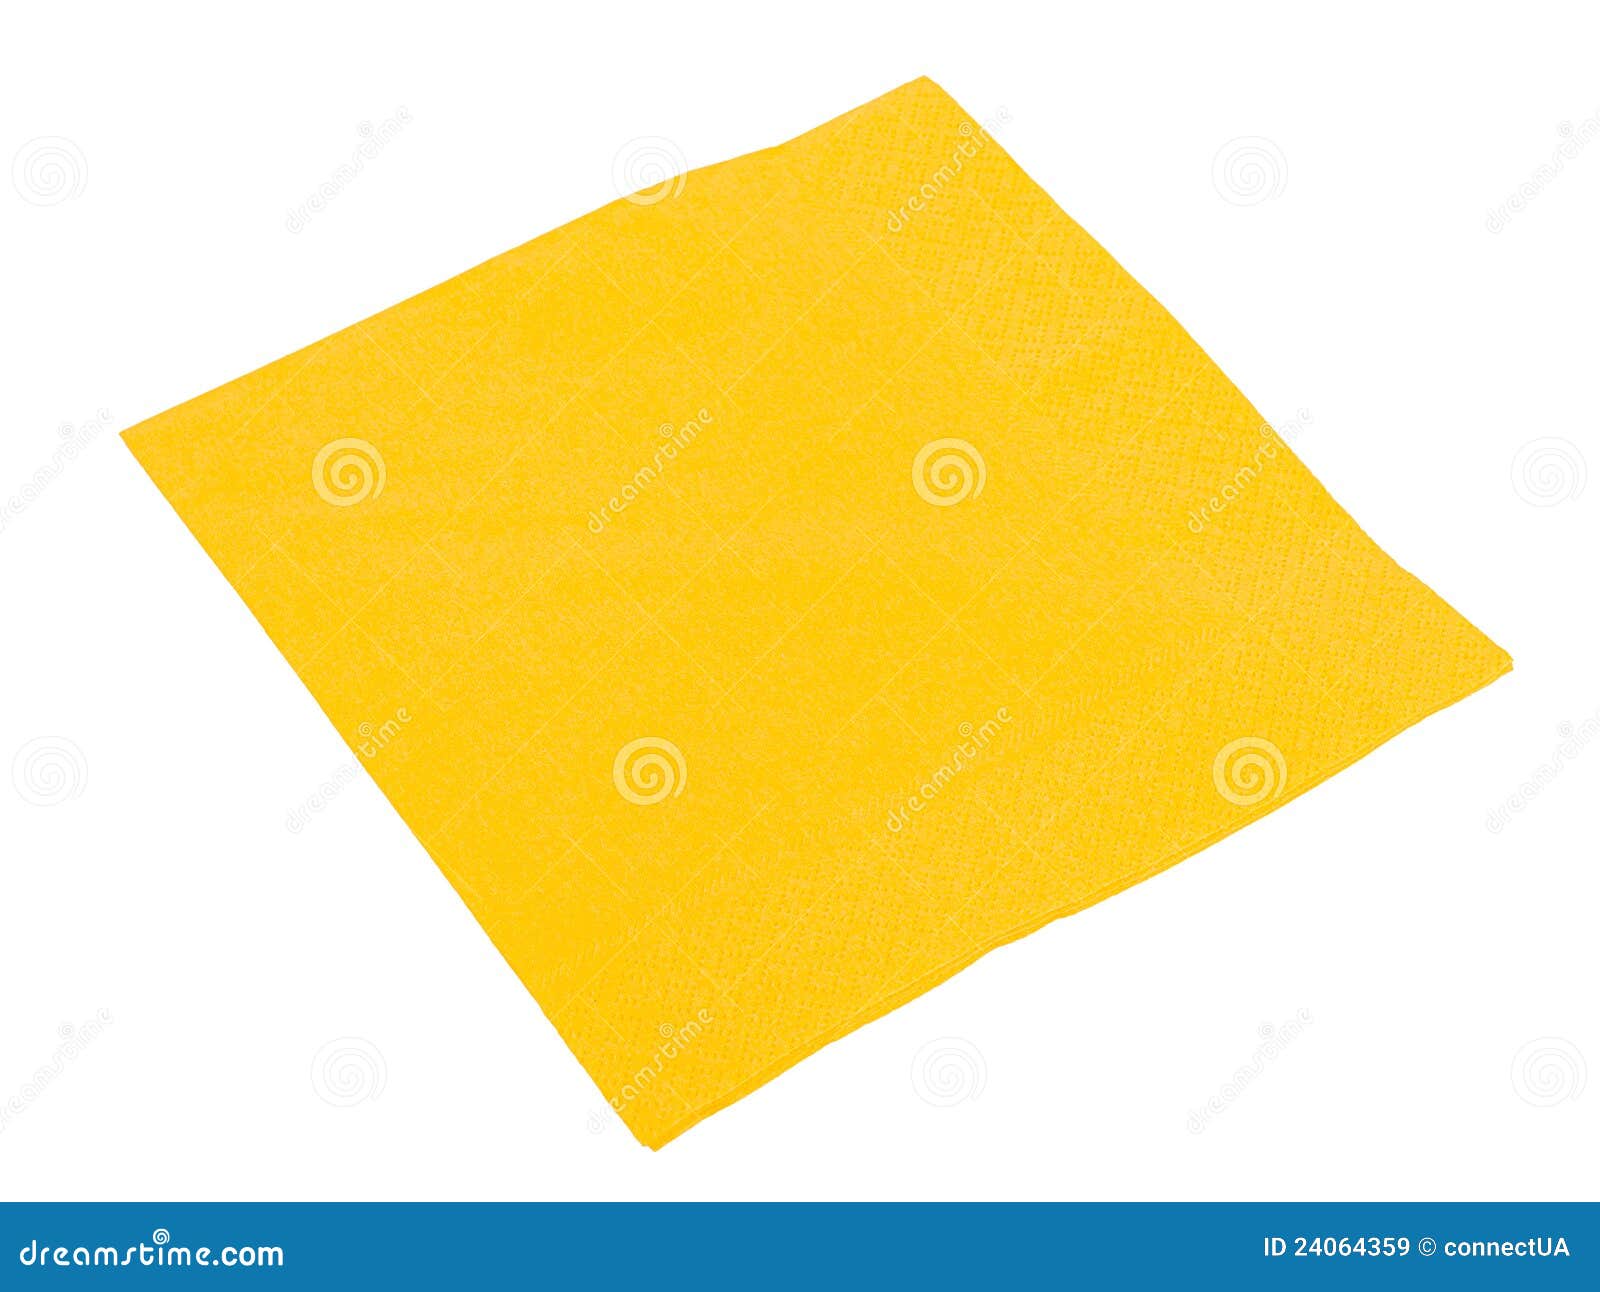 yellow paper clipart - photo #43